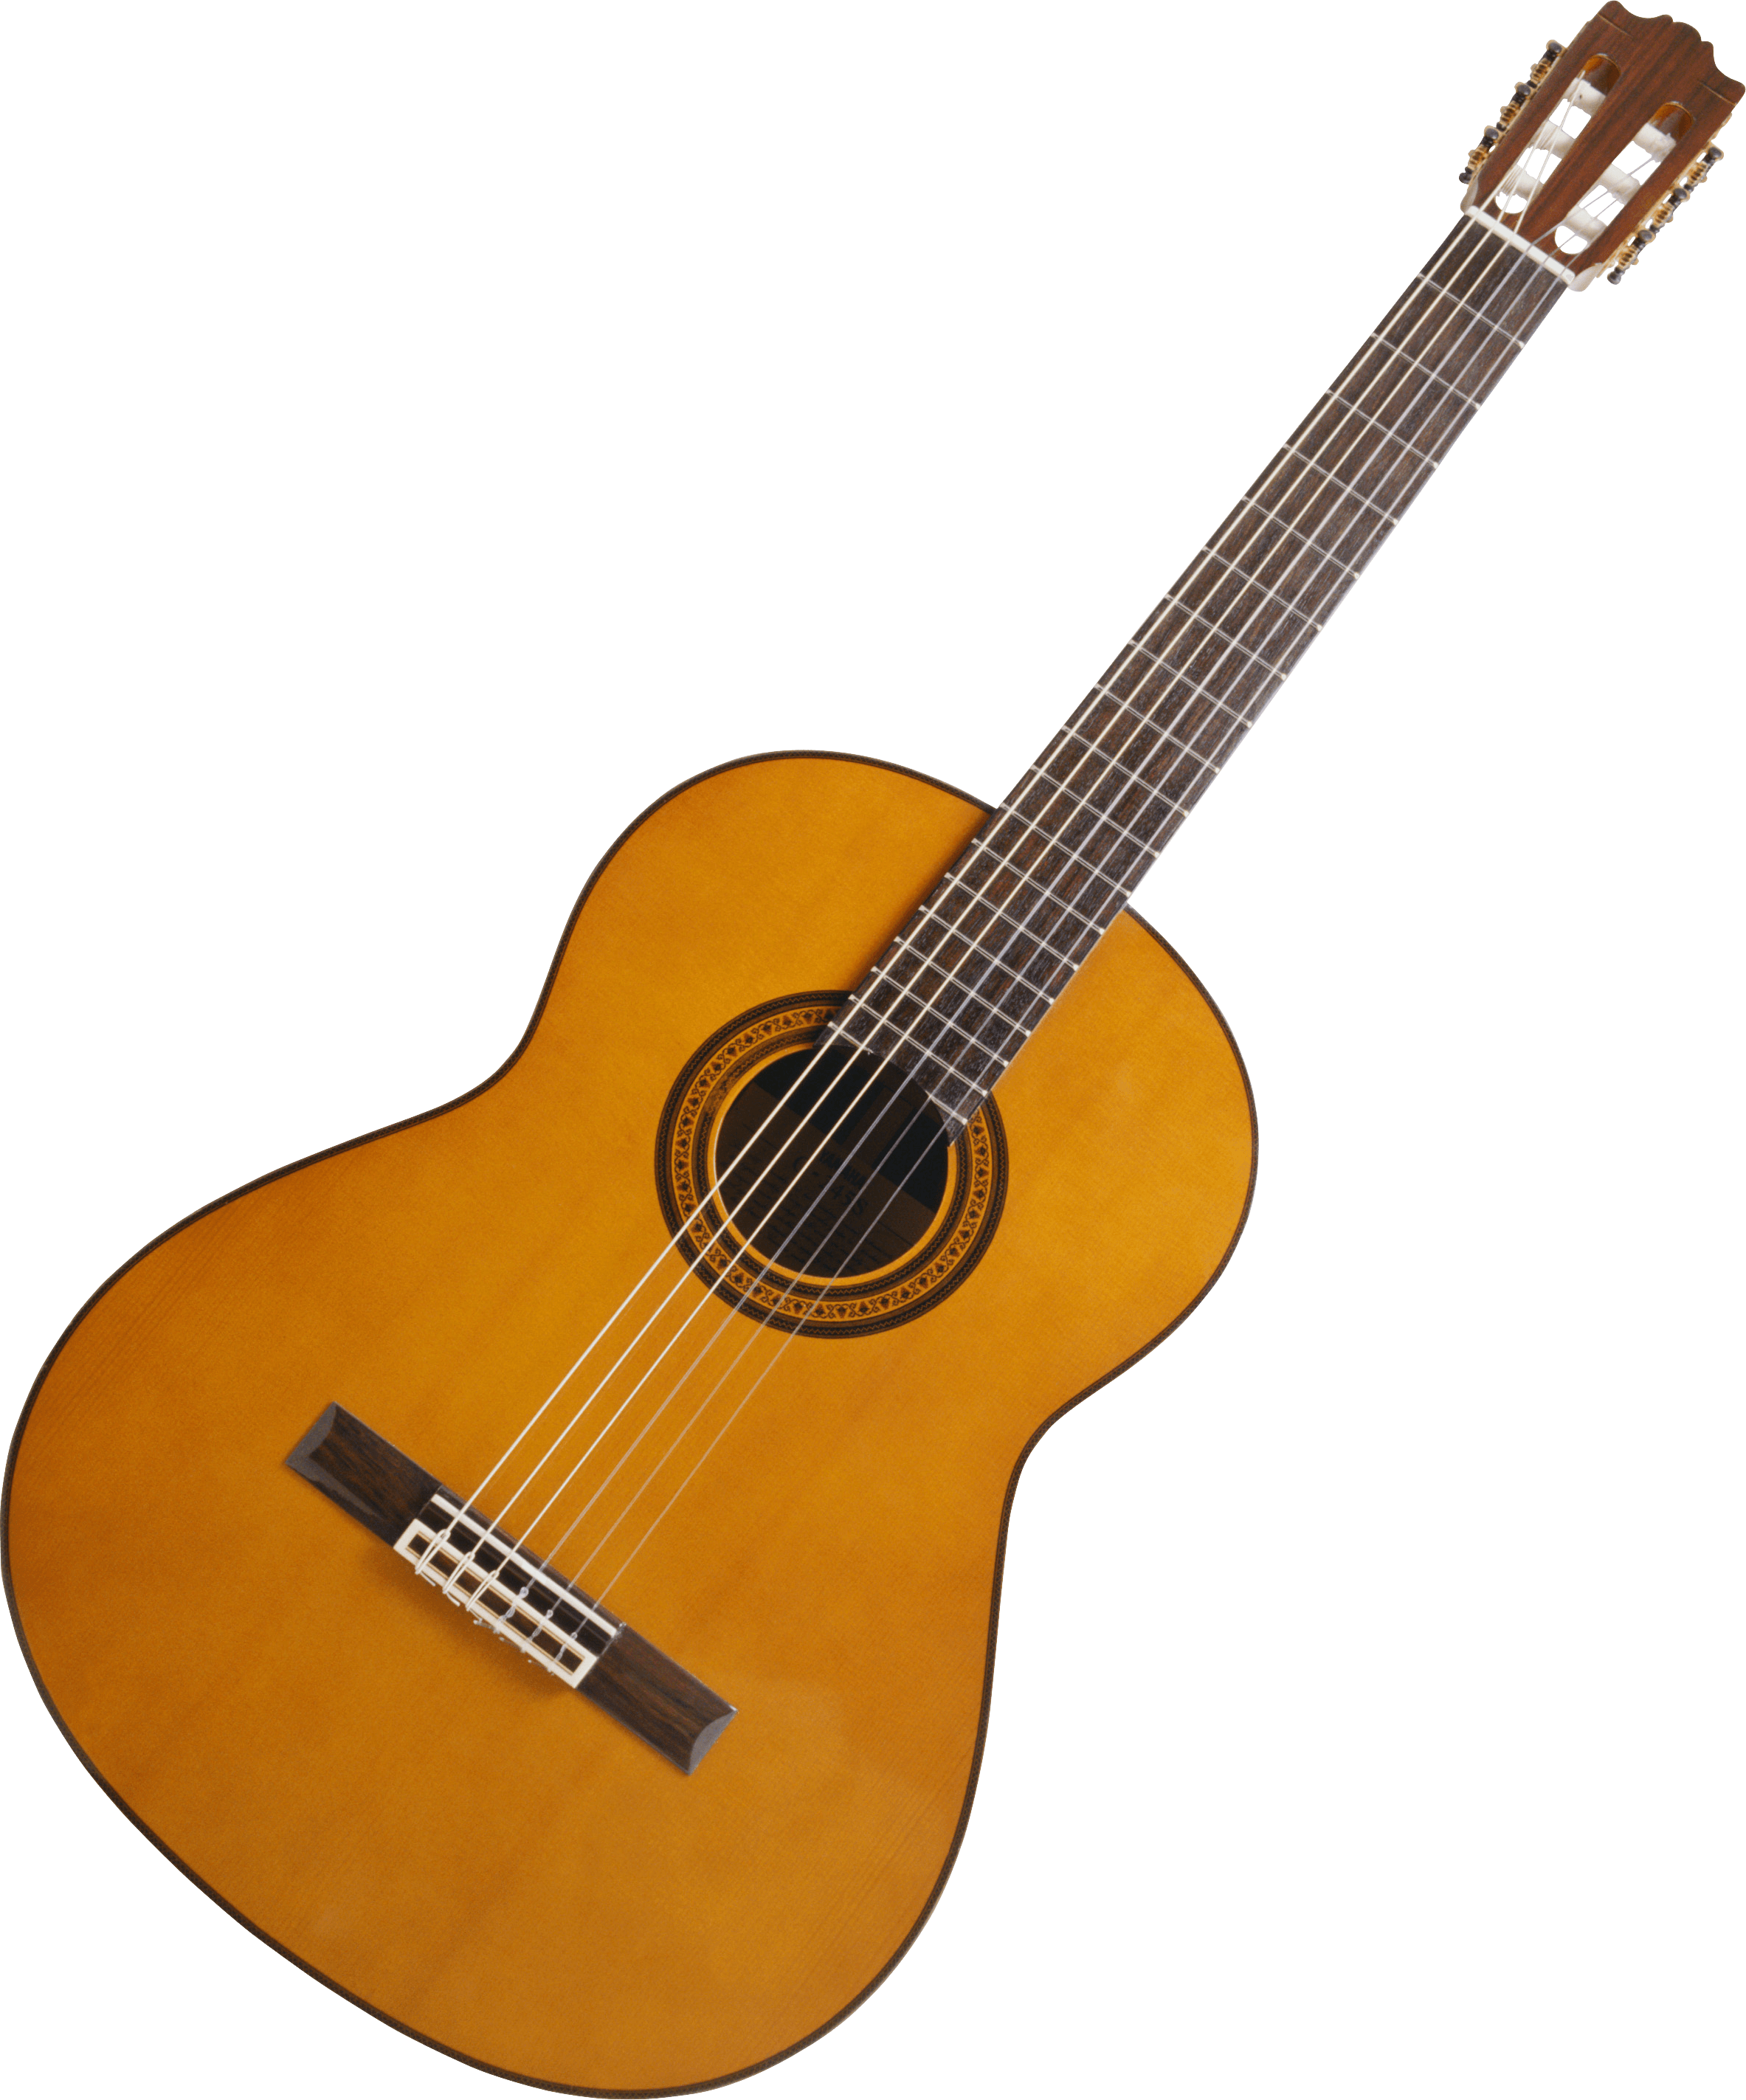 Guitar Acoustic Wooden Download HQ PNG Clipart